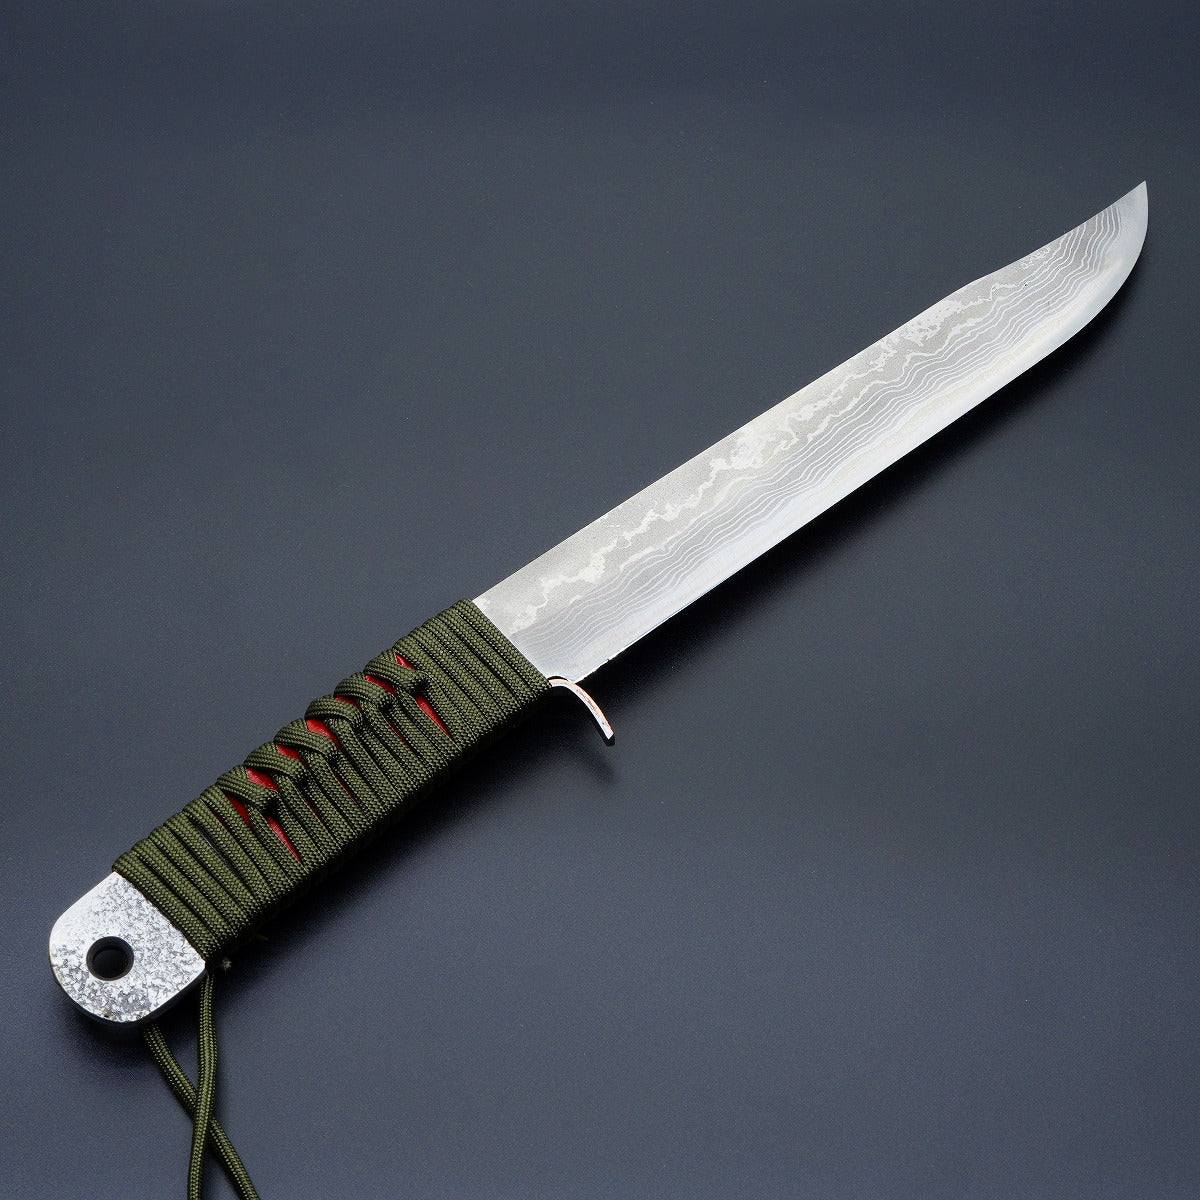 HONMAMON "UNRYU" Japanese Damascus 10 Layers Outdoor Knife, Aogami Steel, 135mm~210mm